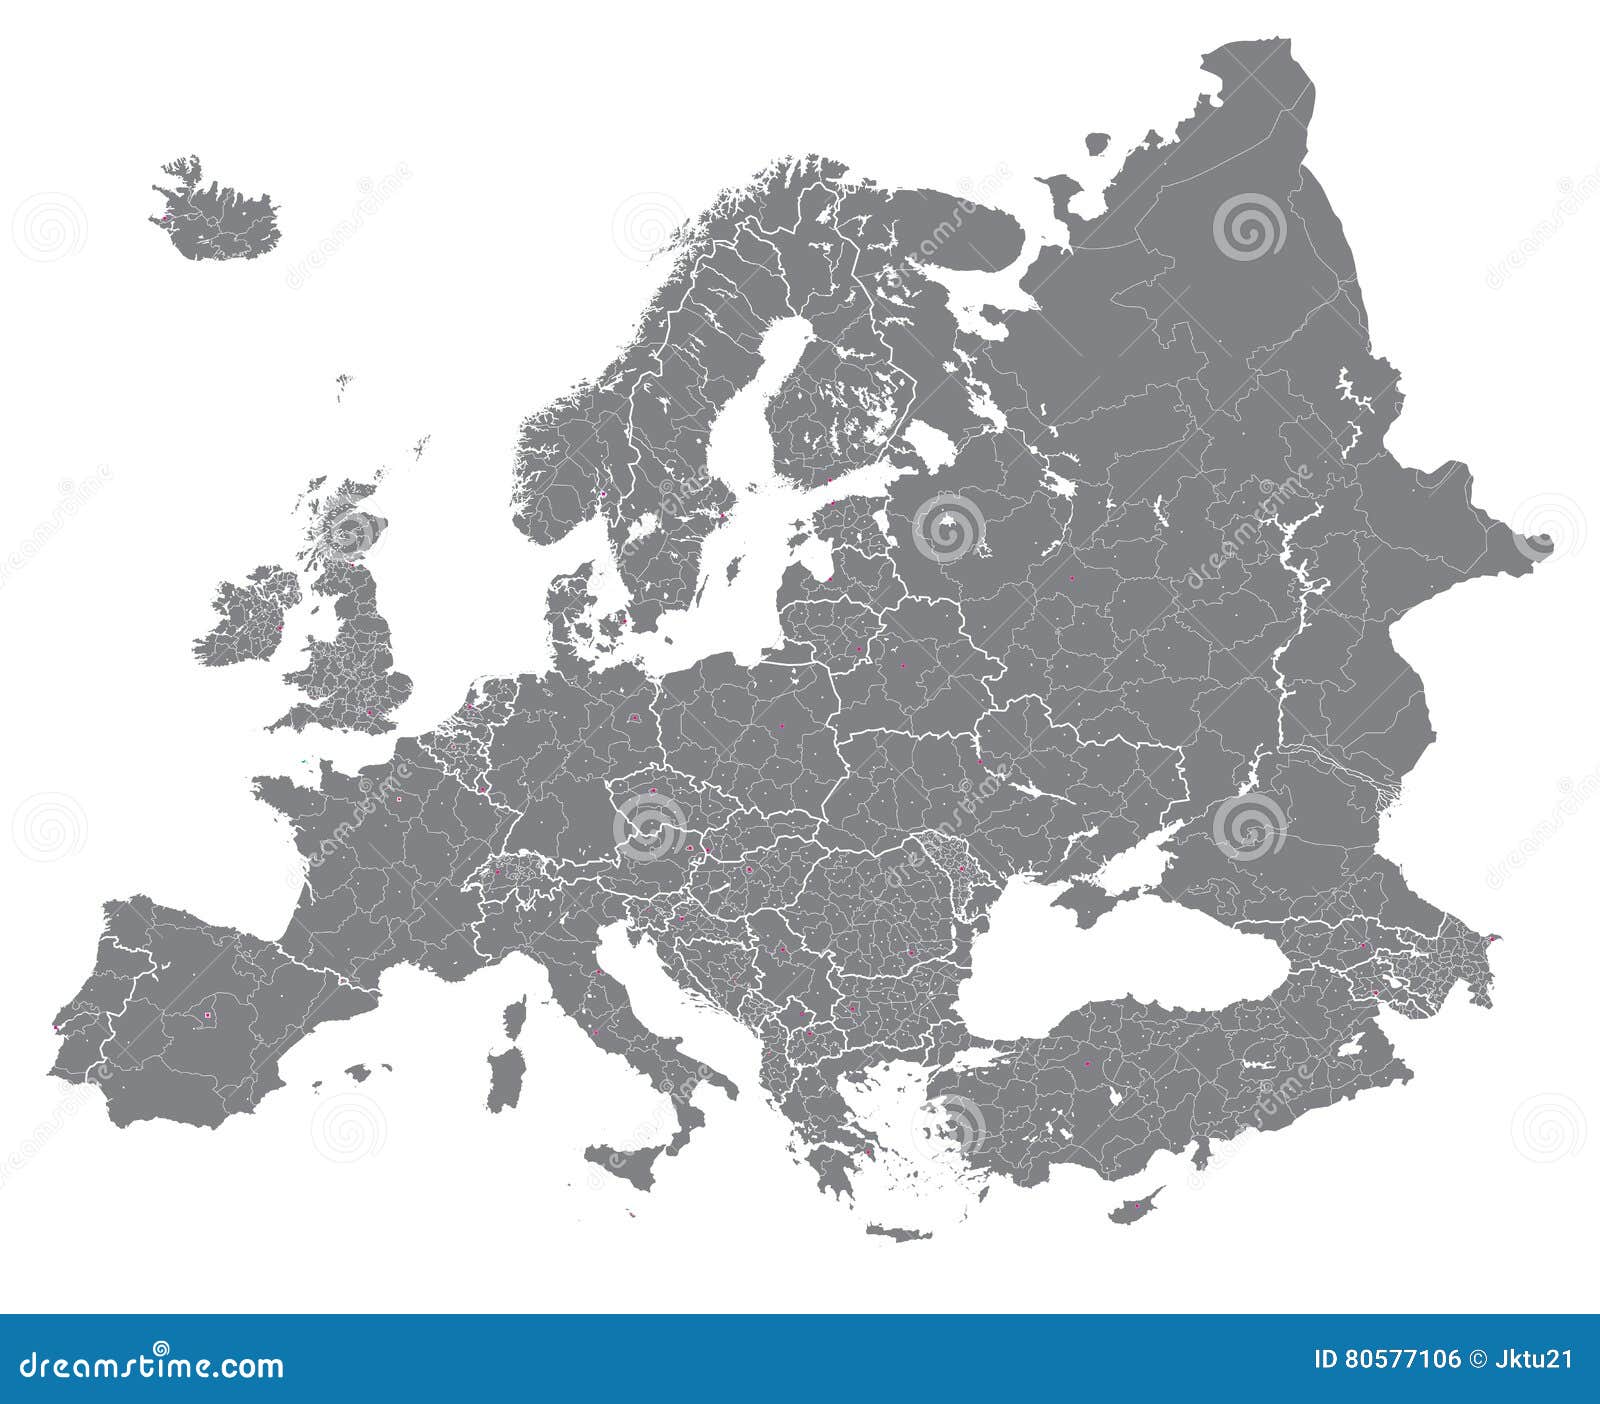 europe  high detailed political map with regions borders. all s separated in detachable layers